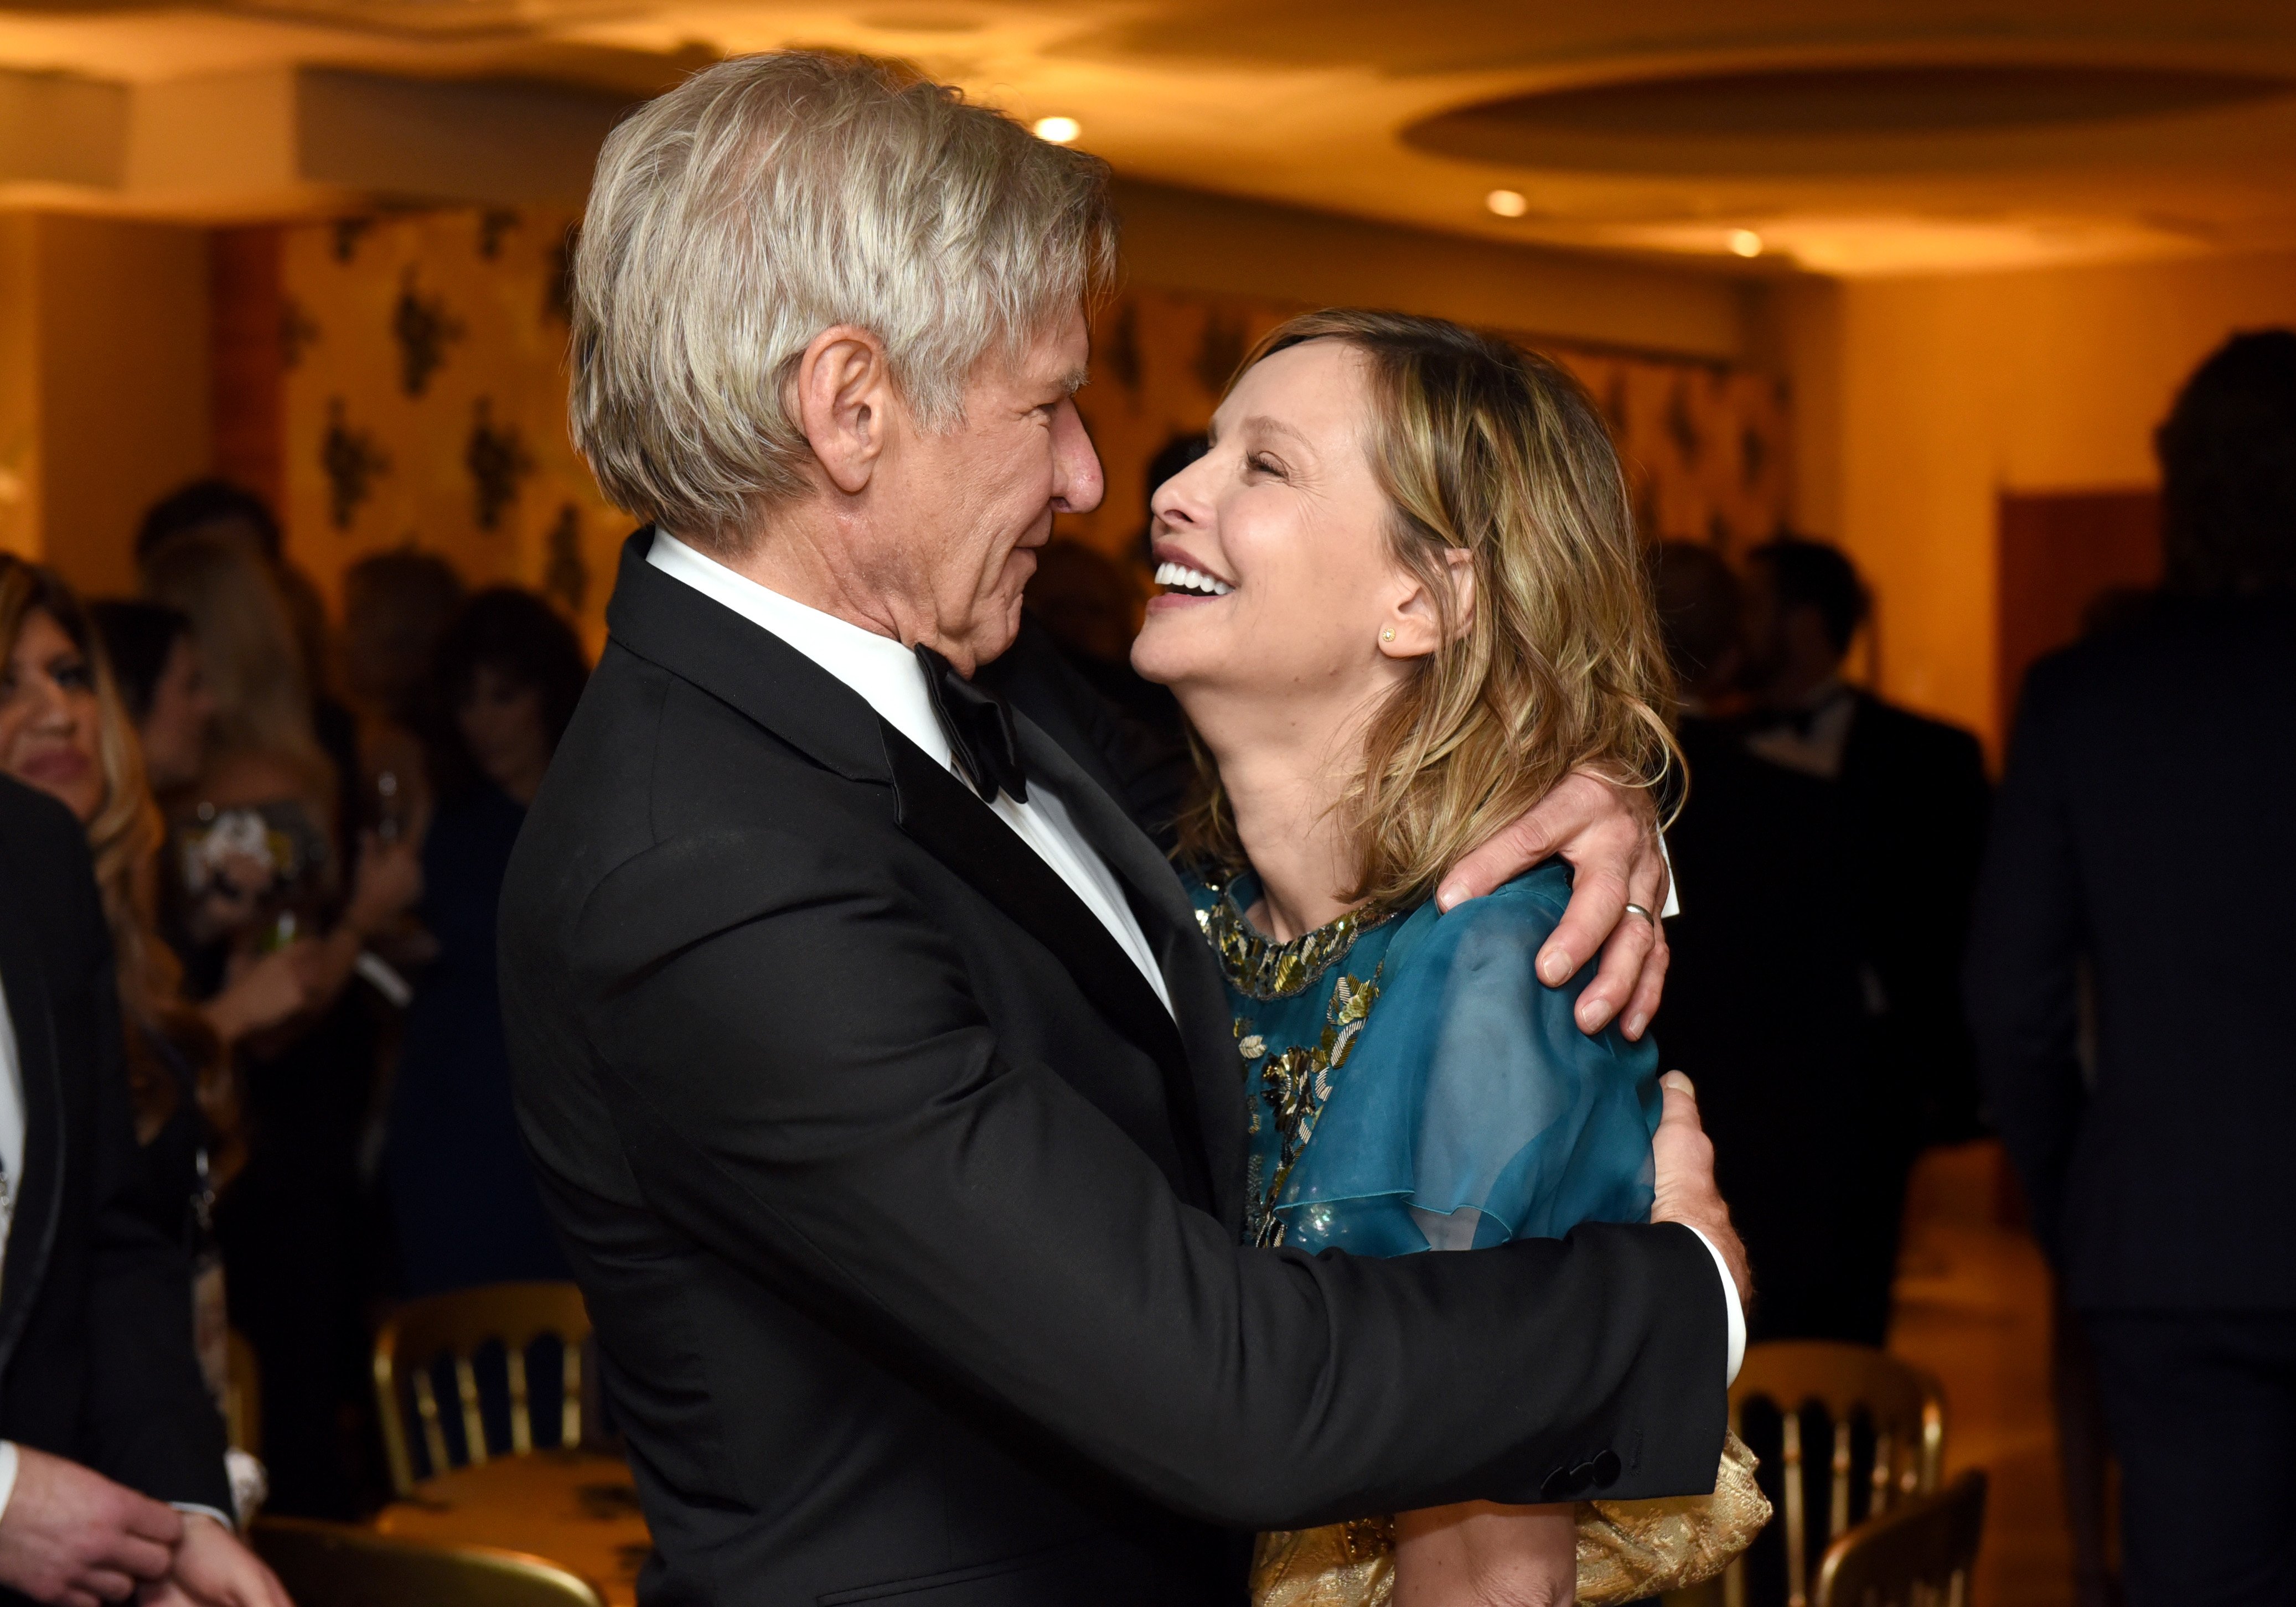 Harrison Ford and Calista Flockhart at HBO's Official Golden Globe Awards After Party on January 10, 2016, in Beverly Hills, California | Source: Getty Images